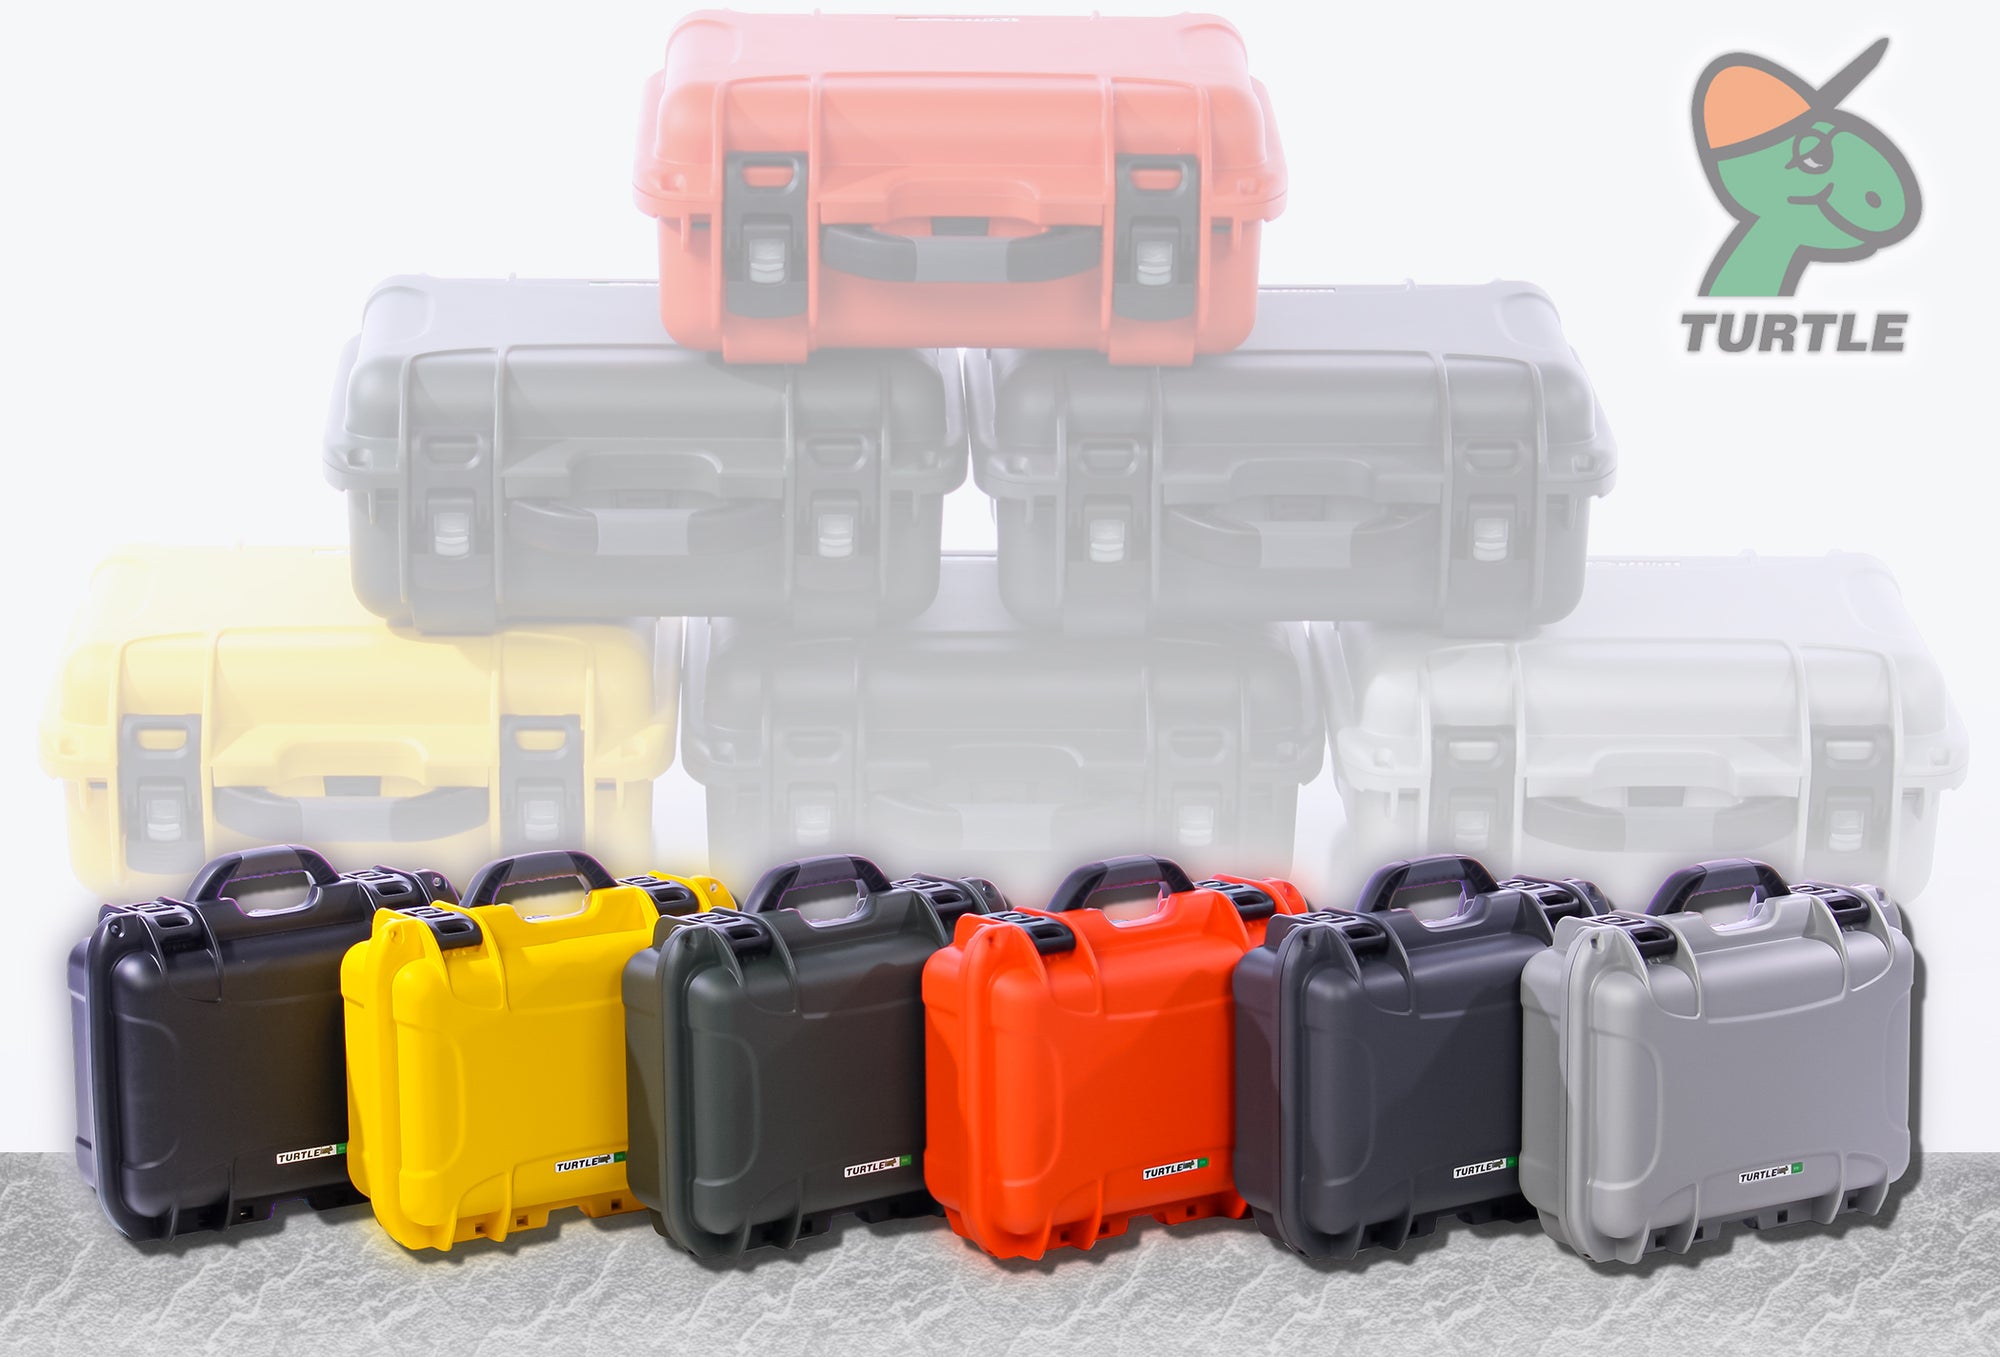 Turtle Case Banner Featuring Each Color case with stacked cases in the background 